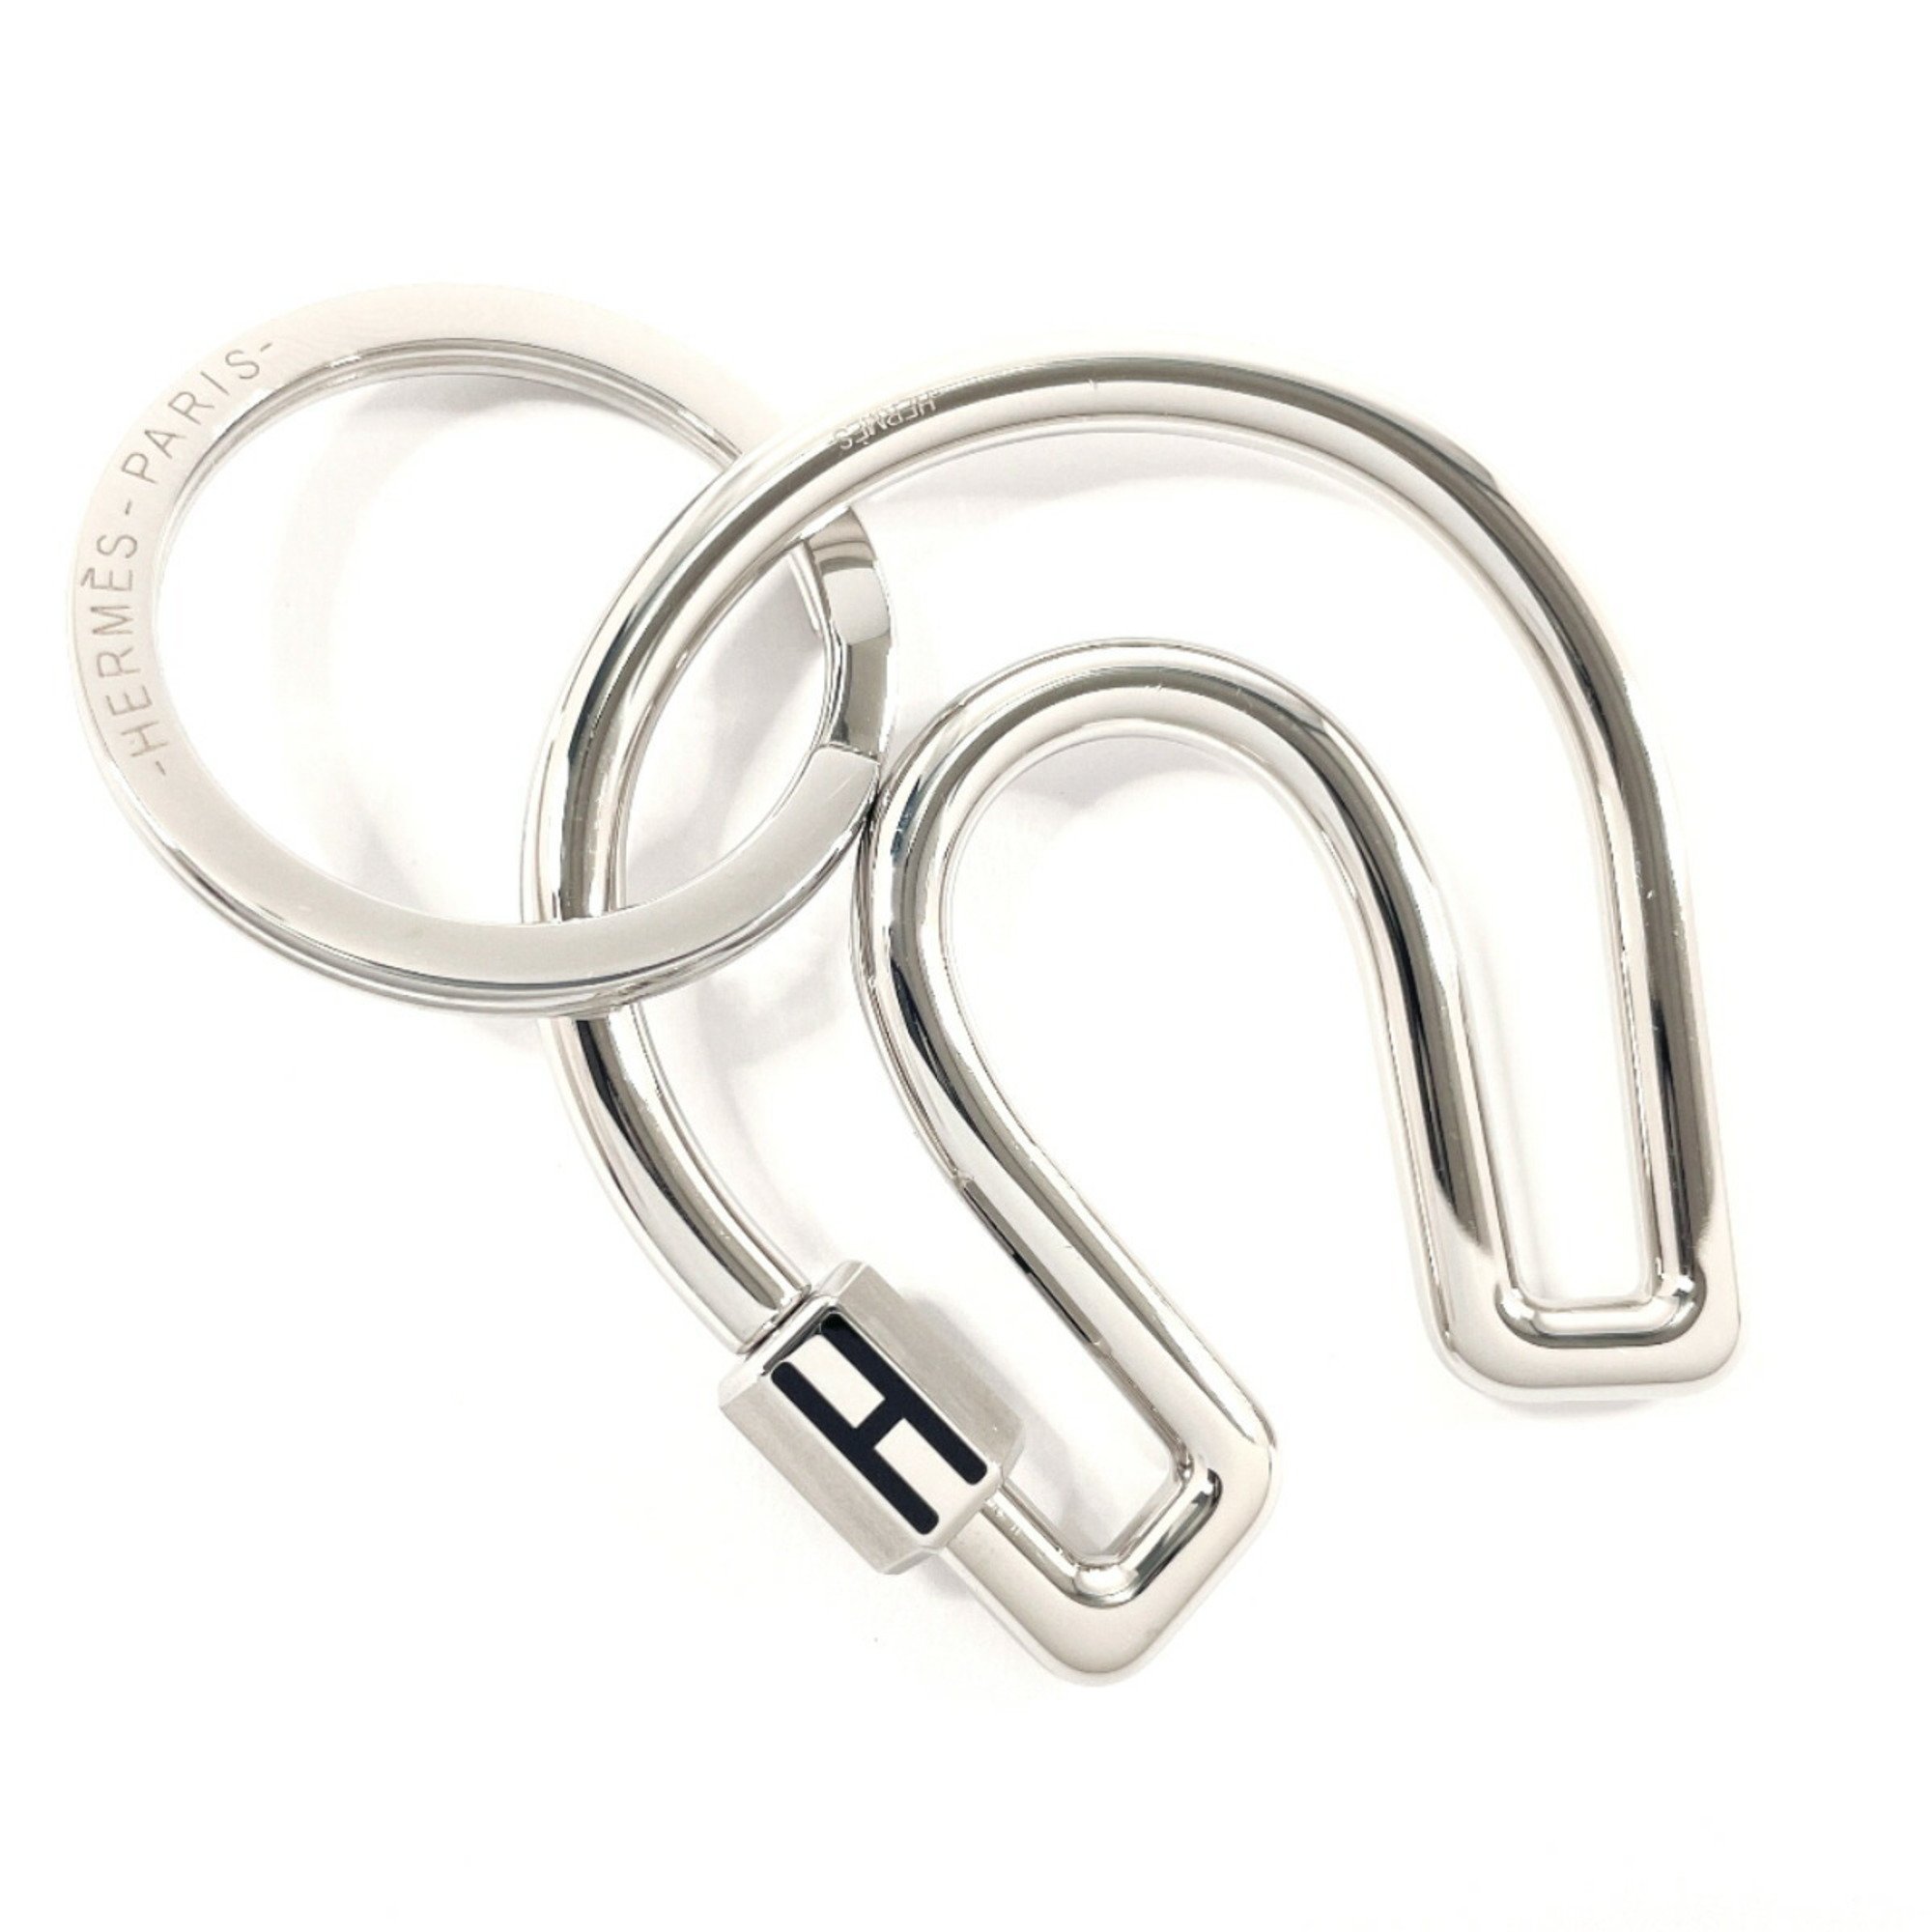 HERMES Hermes Faire a Cheval Keychain Metal Silver Unisex